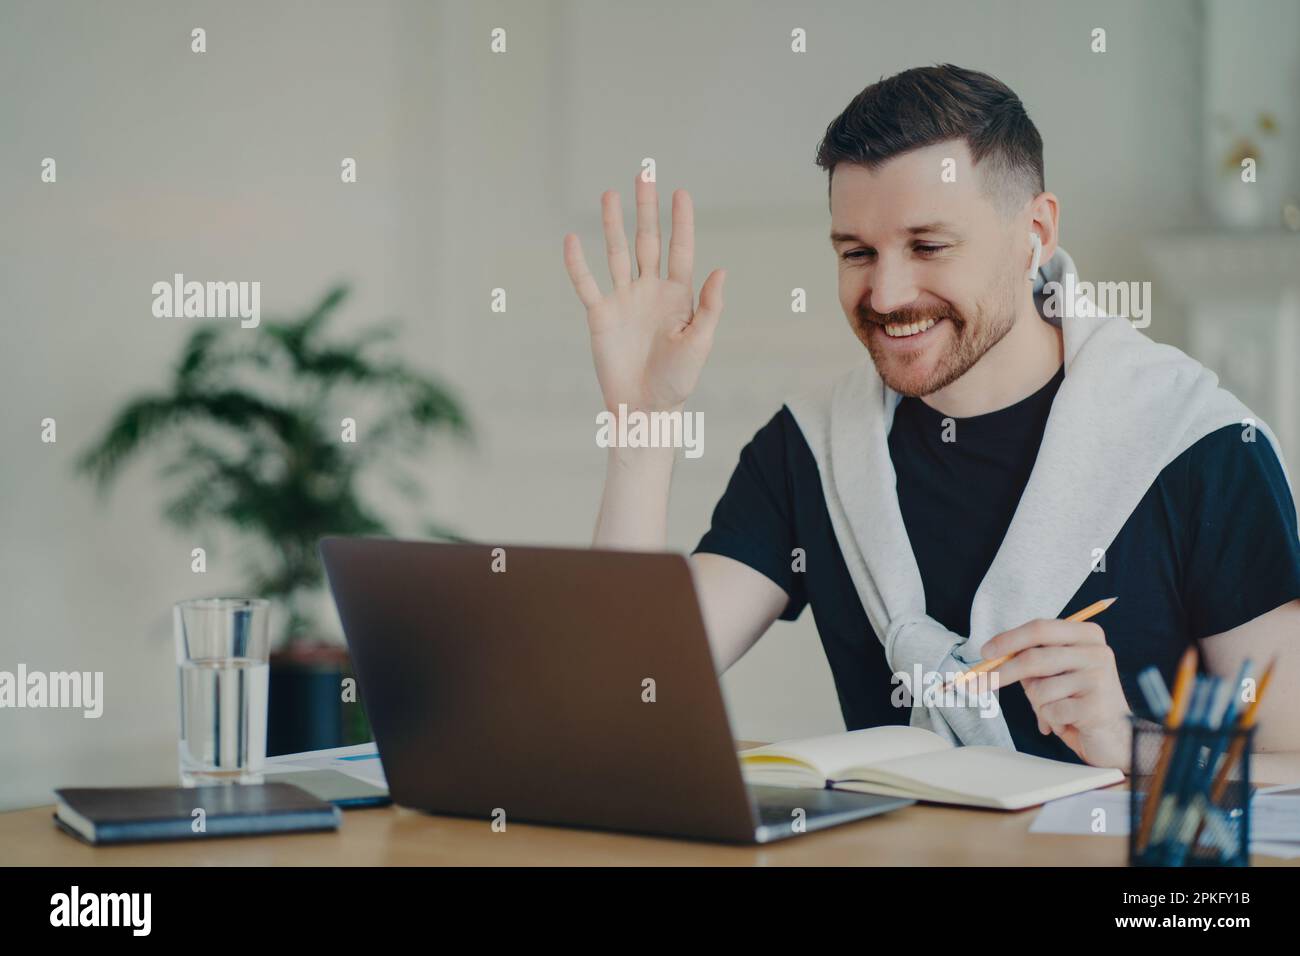 Cheerful bearded man has video conference online waves palm in laptop computer uses wireless earphones poses at coworking space dressed casually write Stock Photo